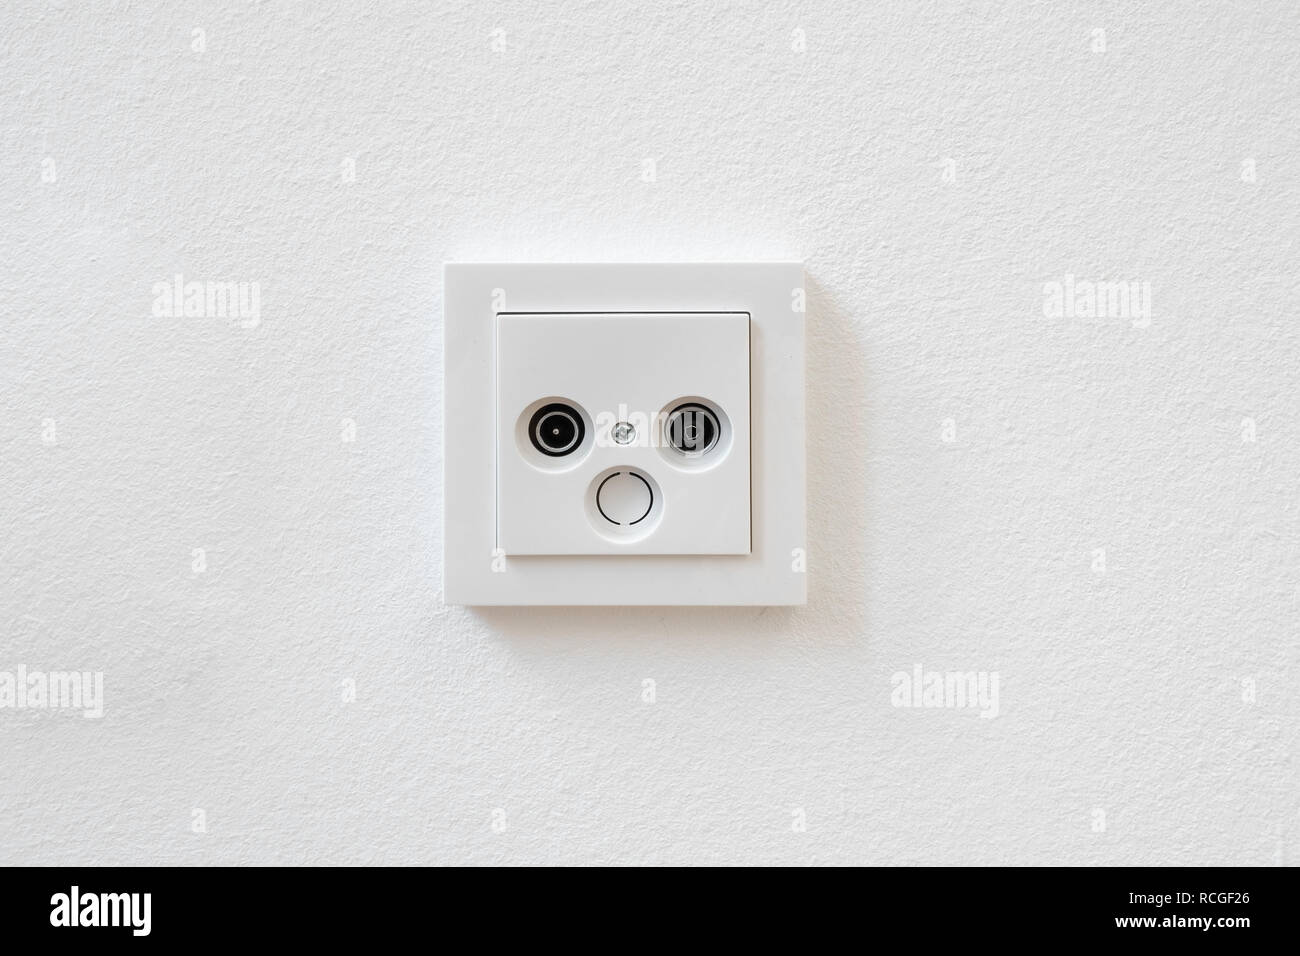 Knop haag Afwezigheid internet and tv outlet , cable tv box socket Stock Photo - Alamy